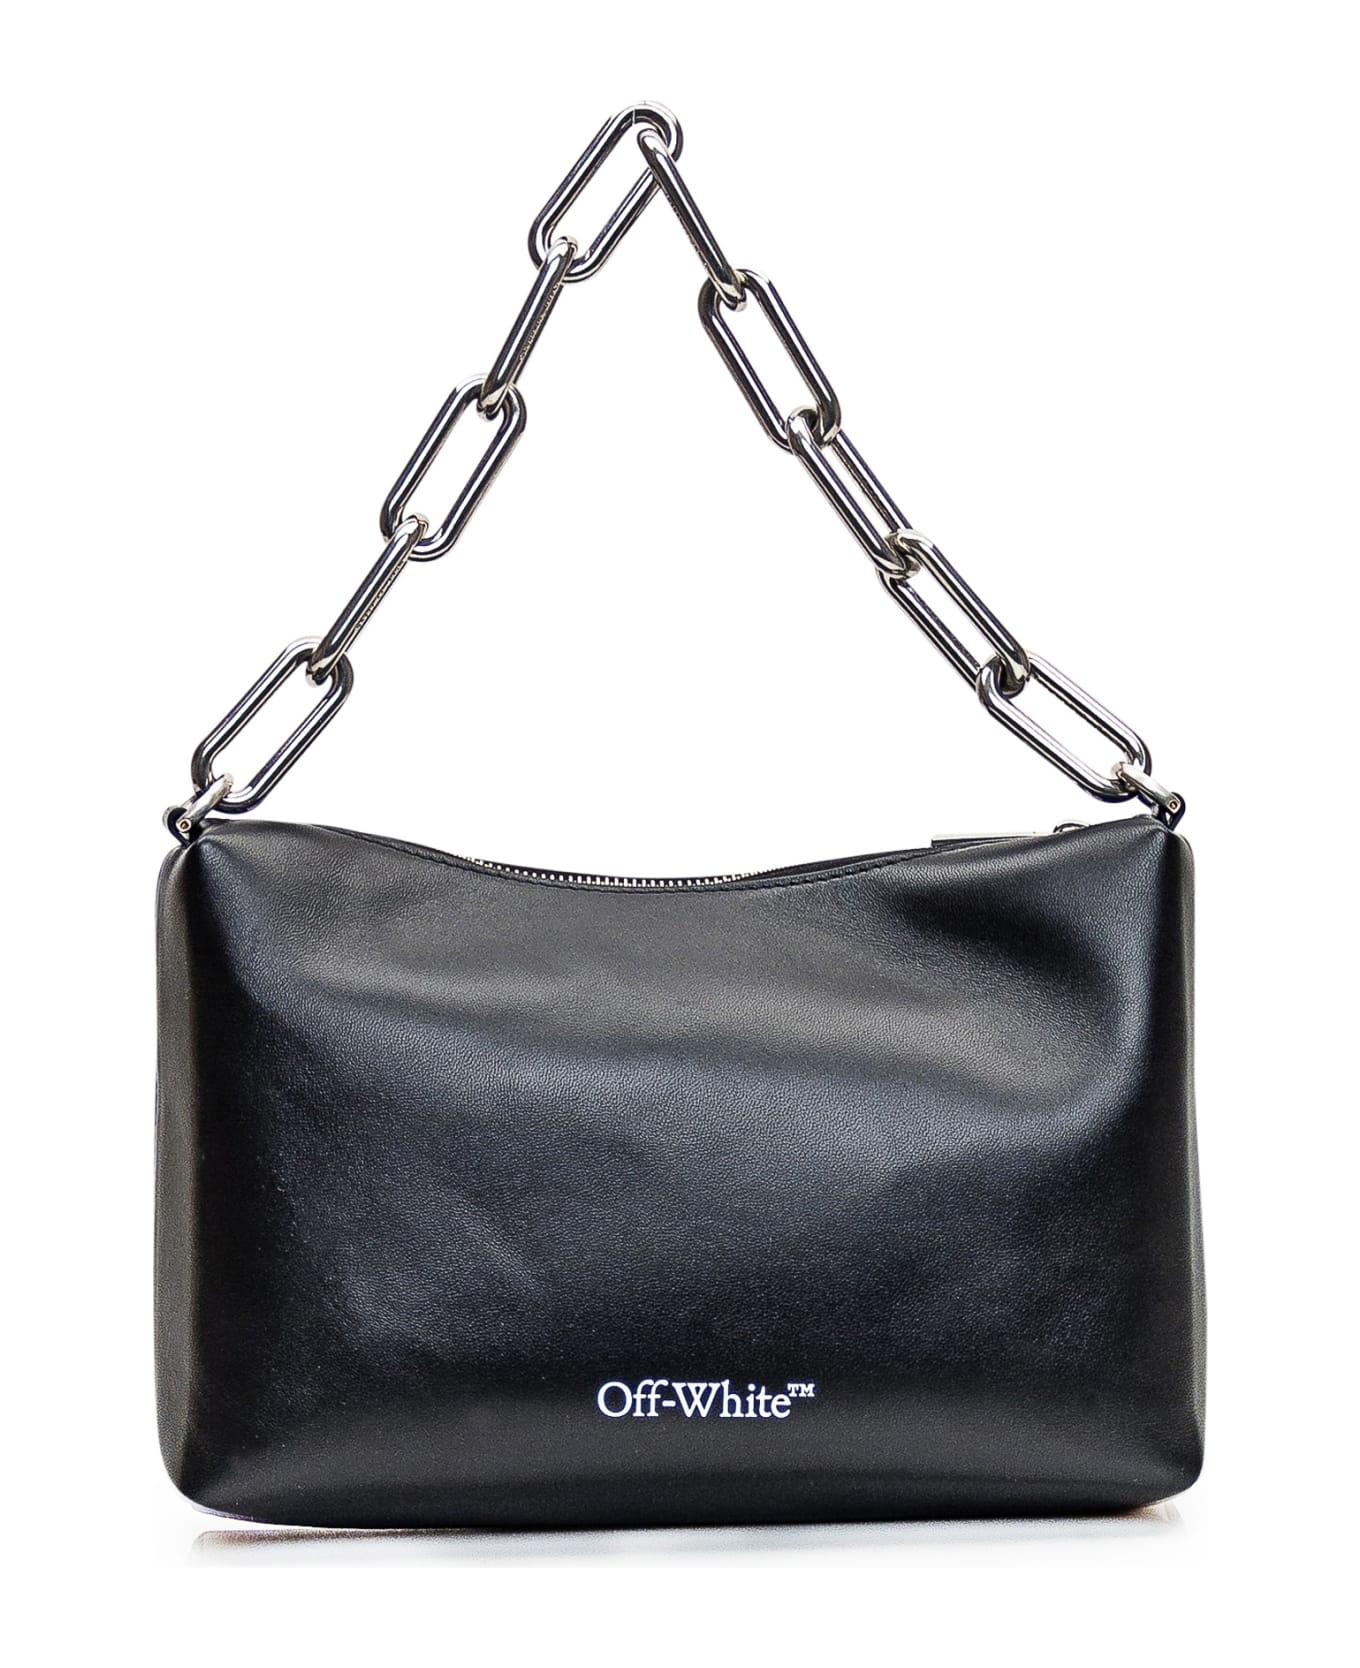 Off-White Pouch With Writing - BLACK SILVER トートバッグ